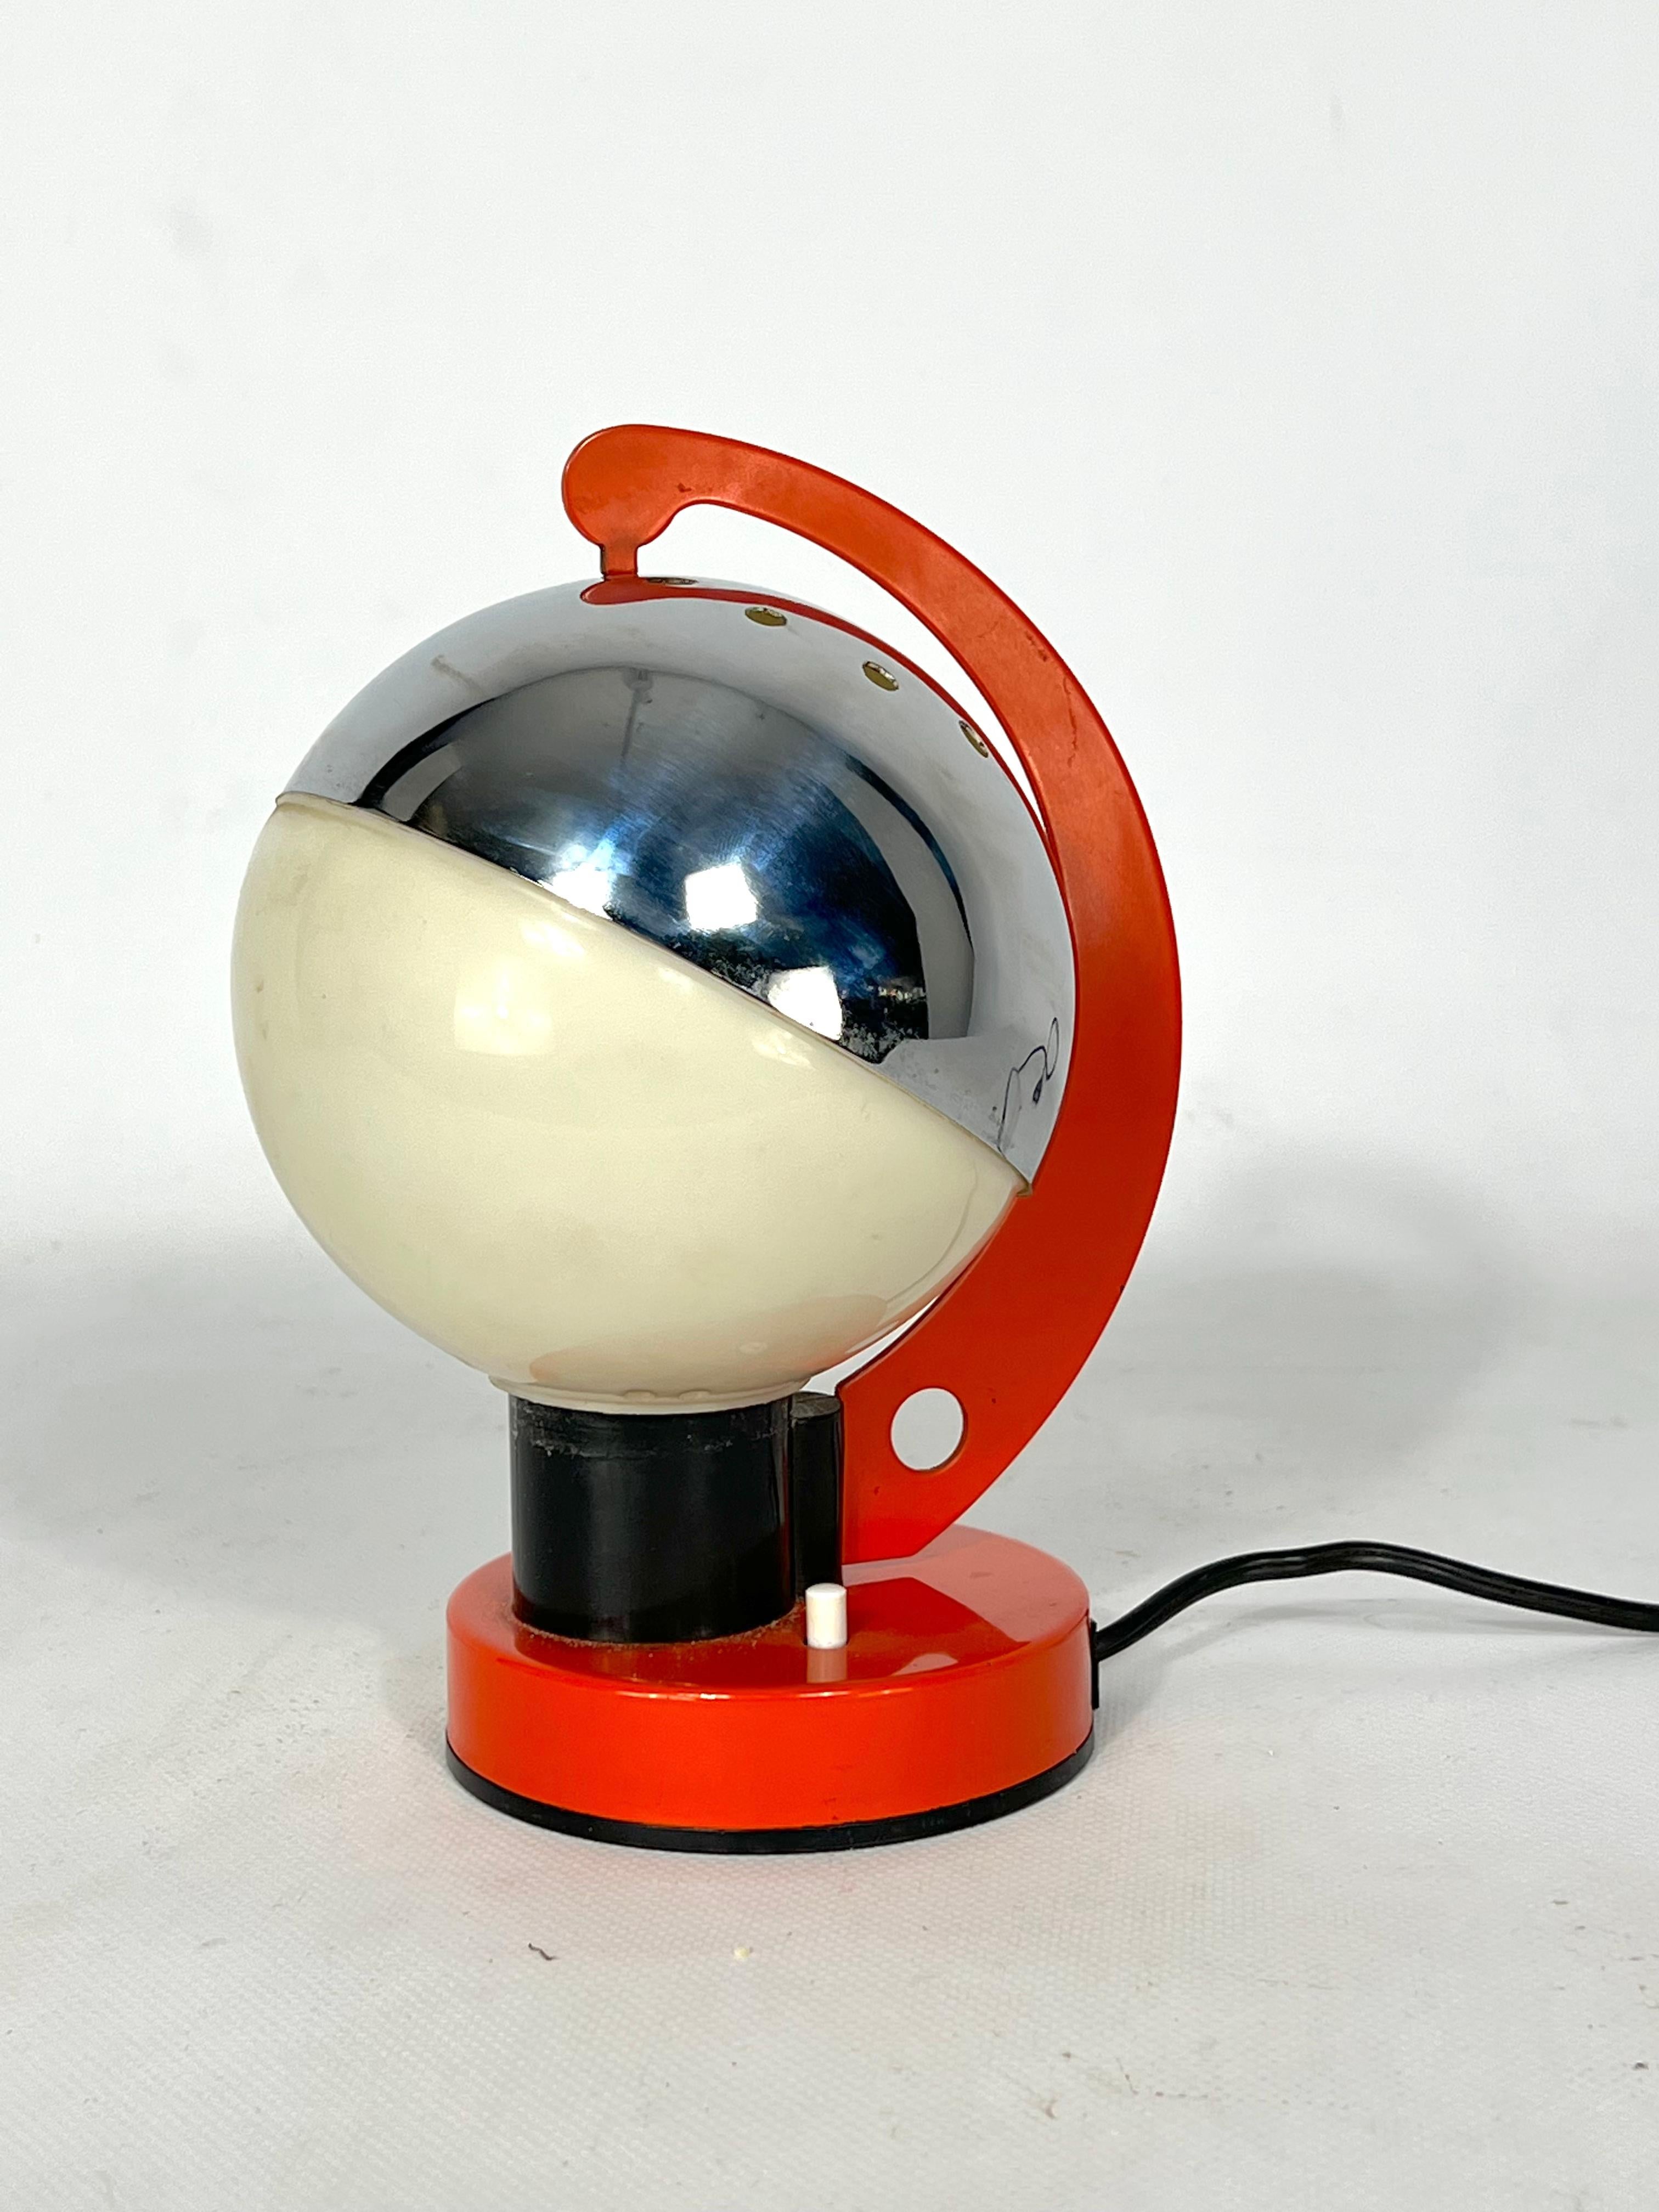 Vintage condition with trace of age and use for this Italian table lamp made from lacquered metal and plastic. Space age from 60s. Full working with EU standard, adaptable on demand for USA standard.